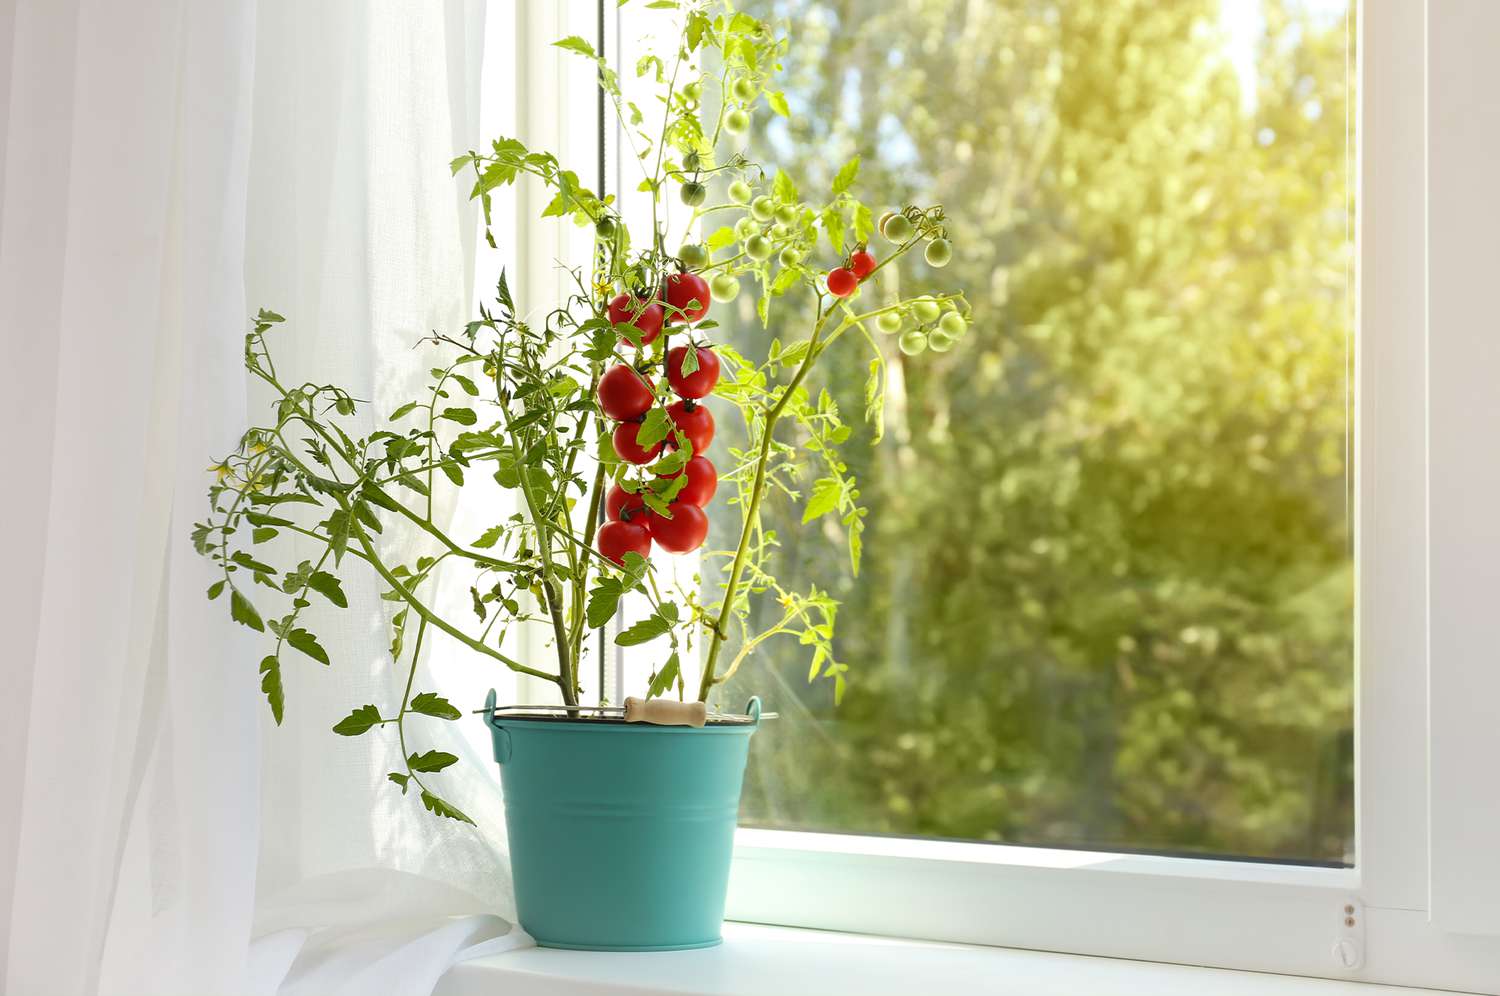 How to grow tomatoes at home during the Winter